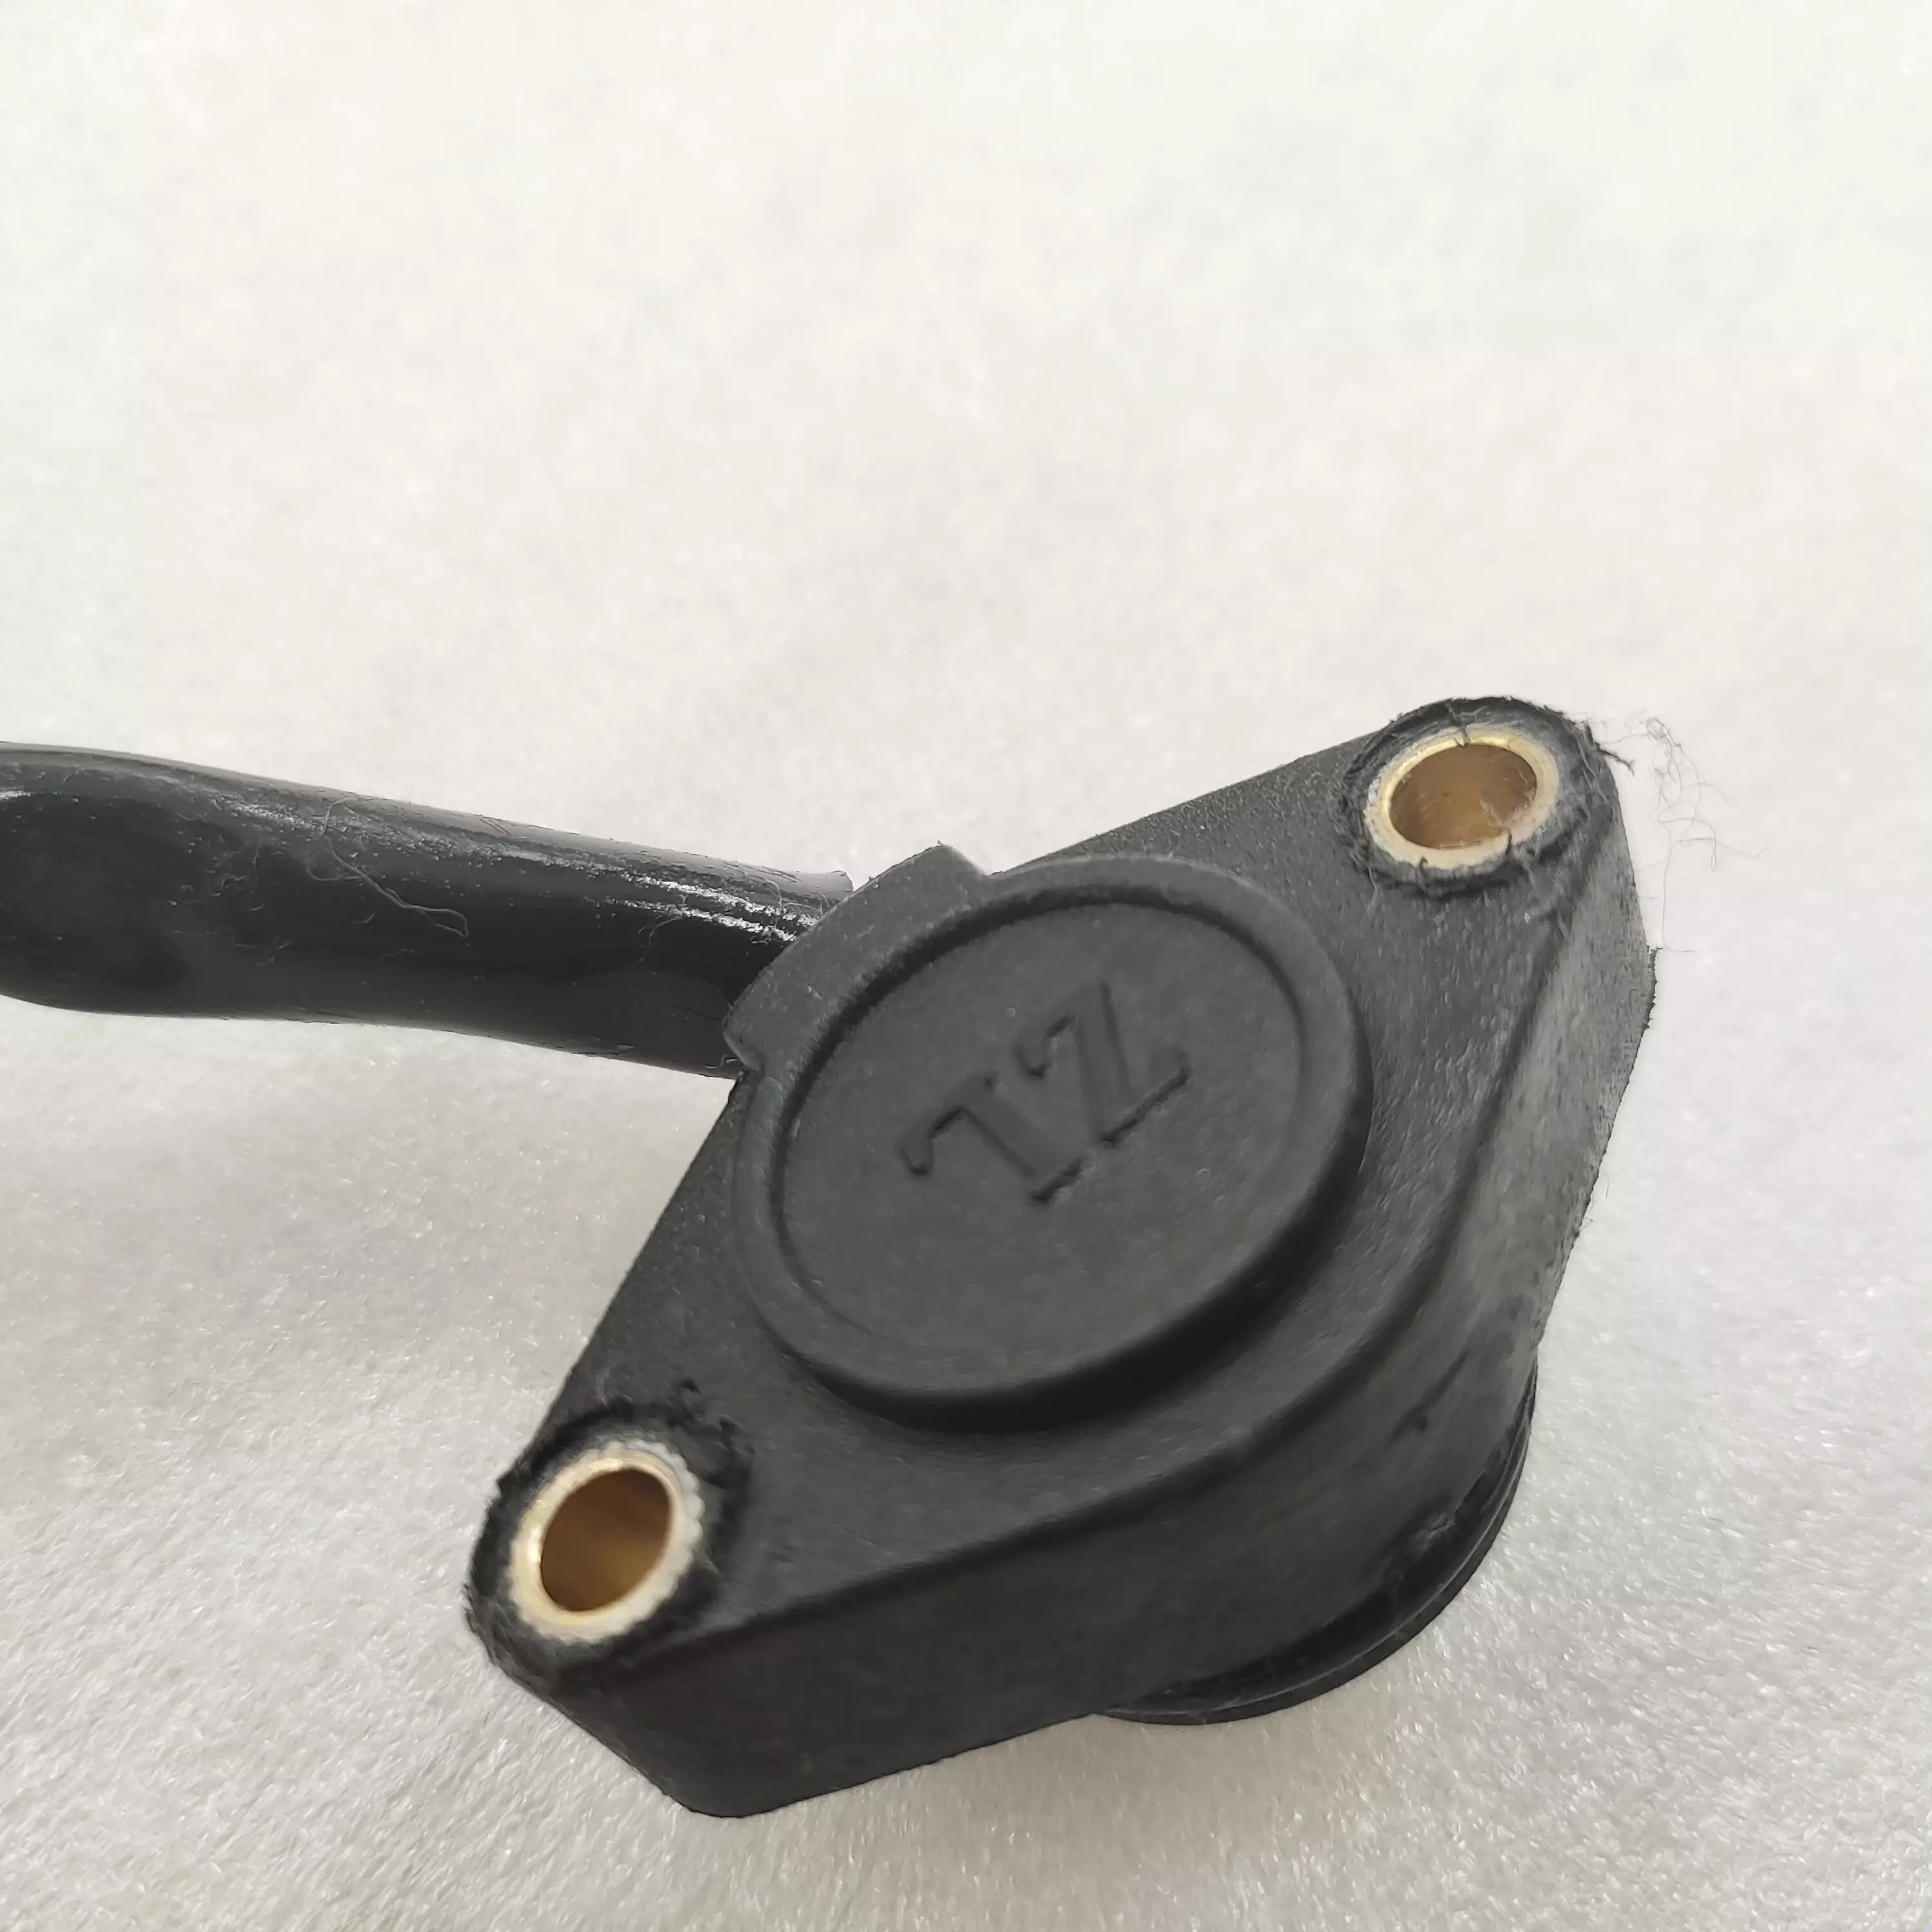 Zongshen loncin lifan 125cc 250cc  motorcycle gear indicator sensor cable tricycle accessories